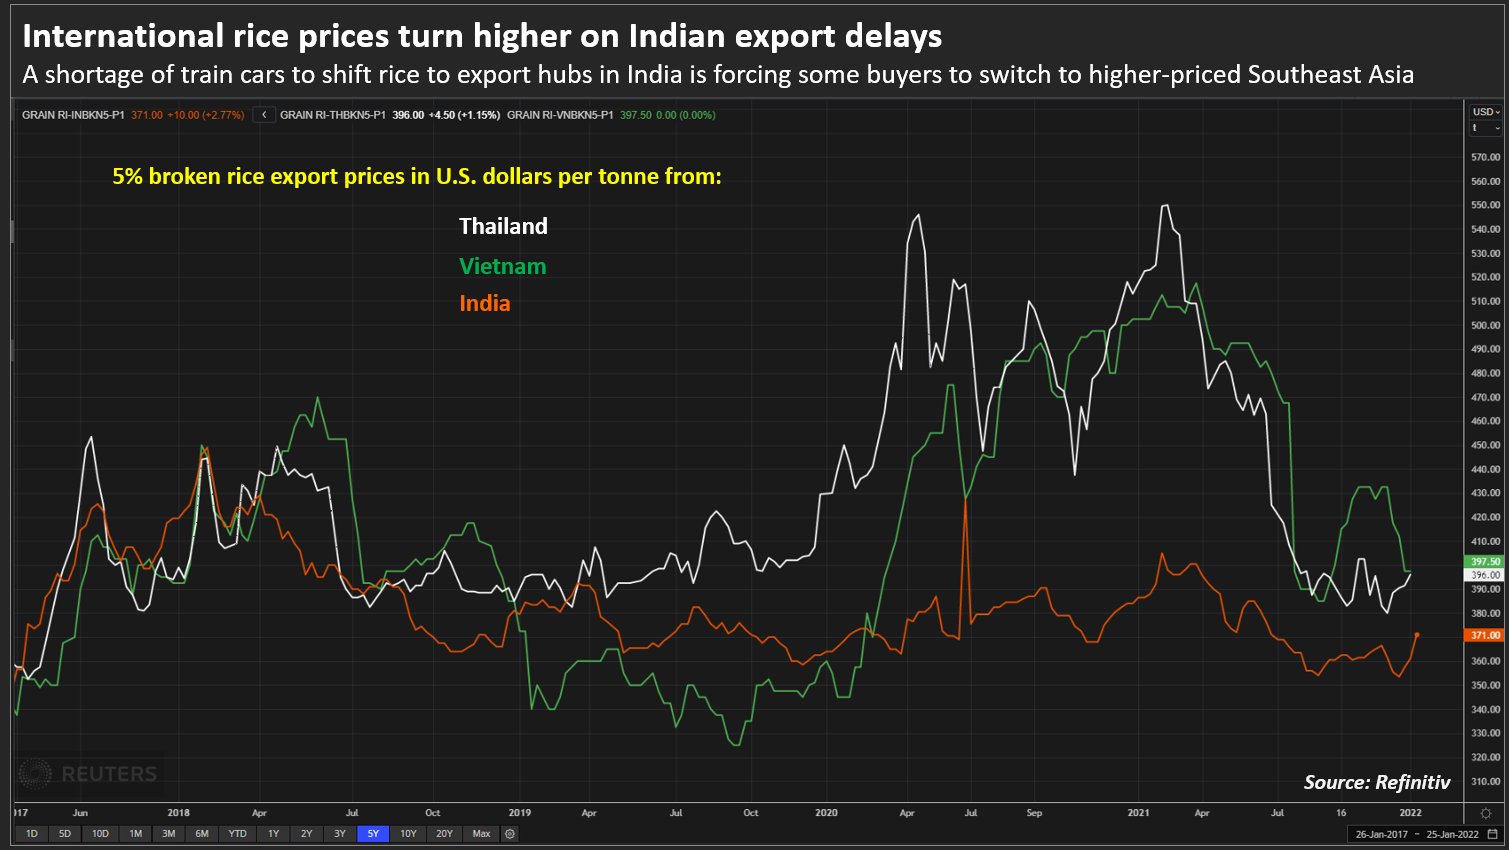 International rice prices rise due to delays in Indian exports